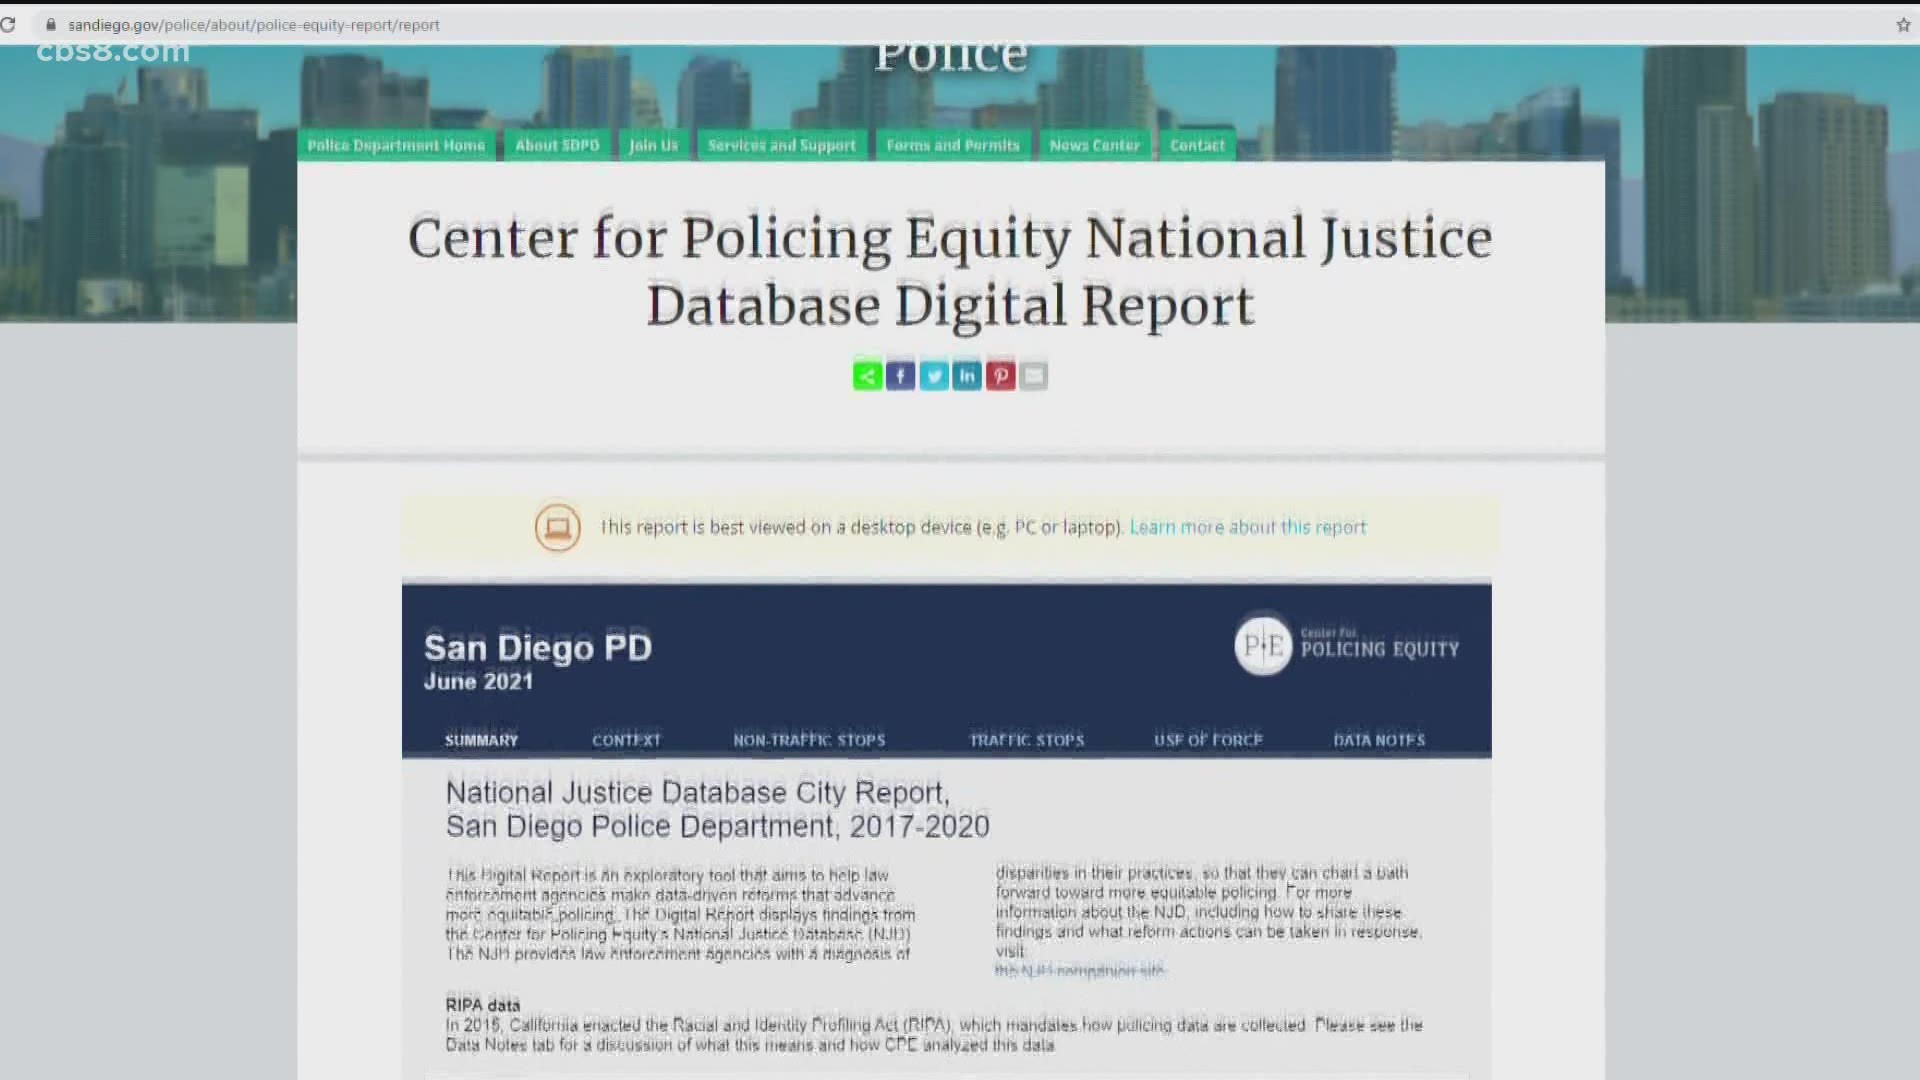 CPE’s Digital Report shows that from 2017-2020, Black people were subjected to force five times more often as White people per year, on average.